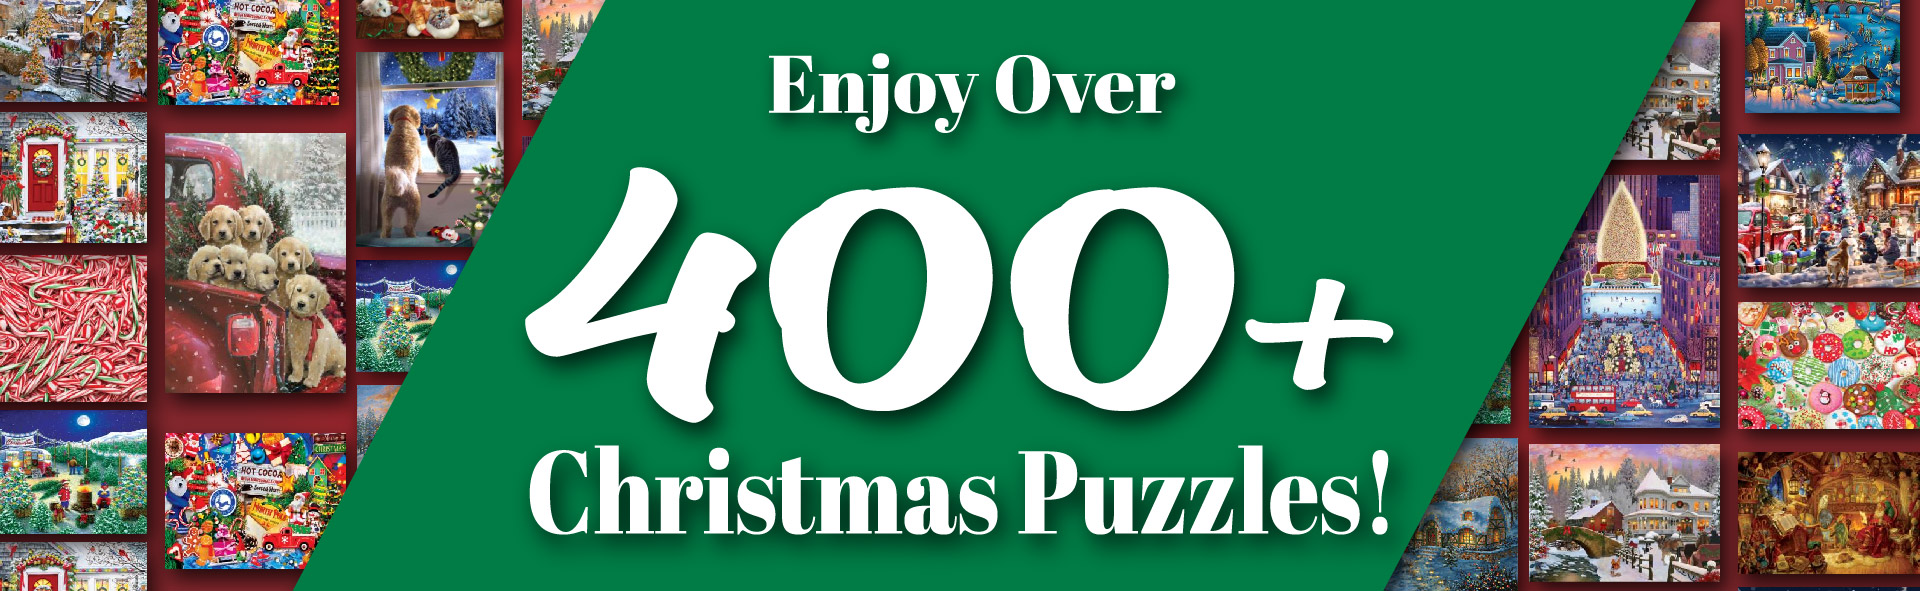 11/29-12/07 SP Christmas Puzzles Homepage